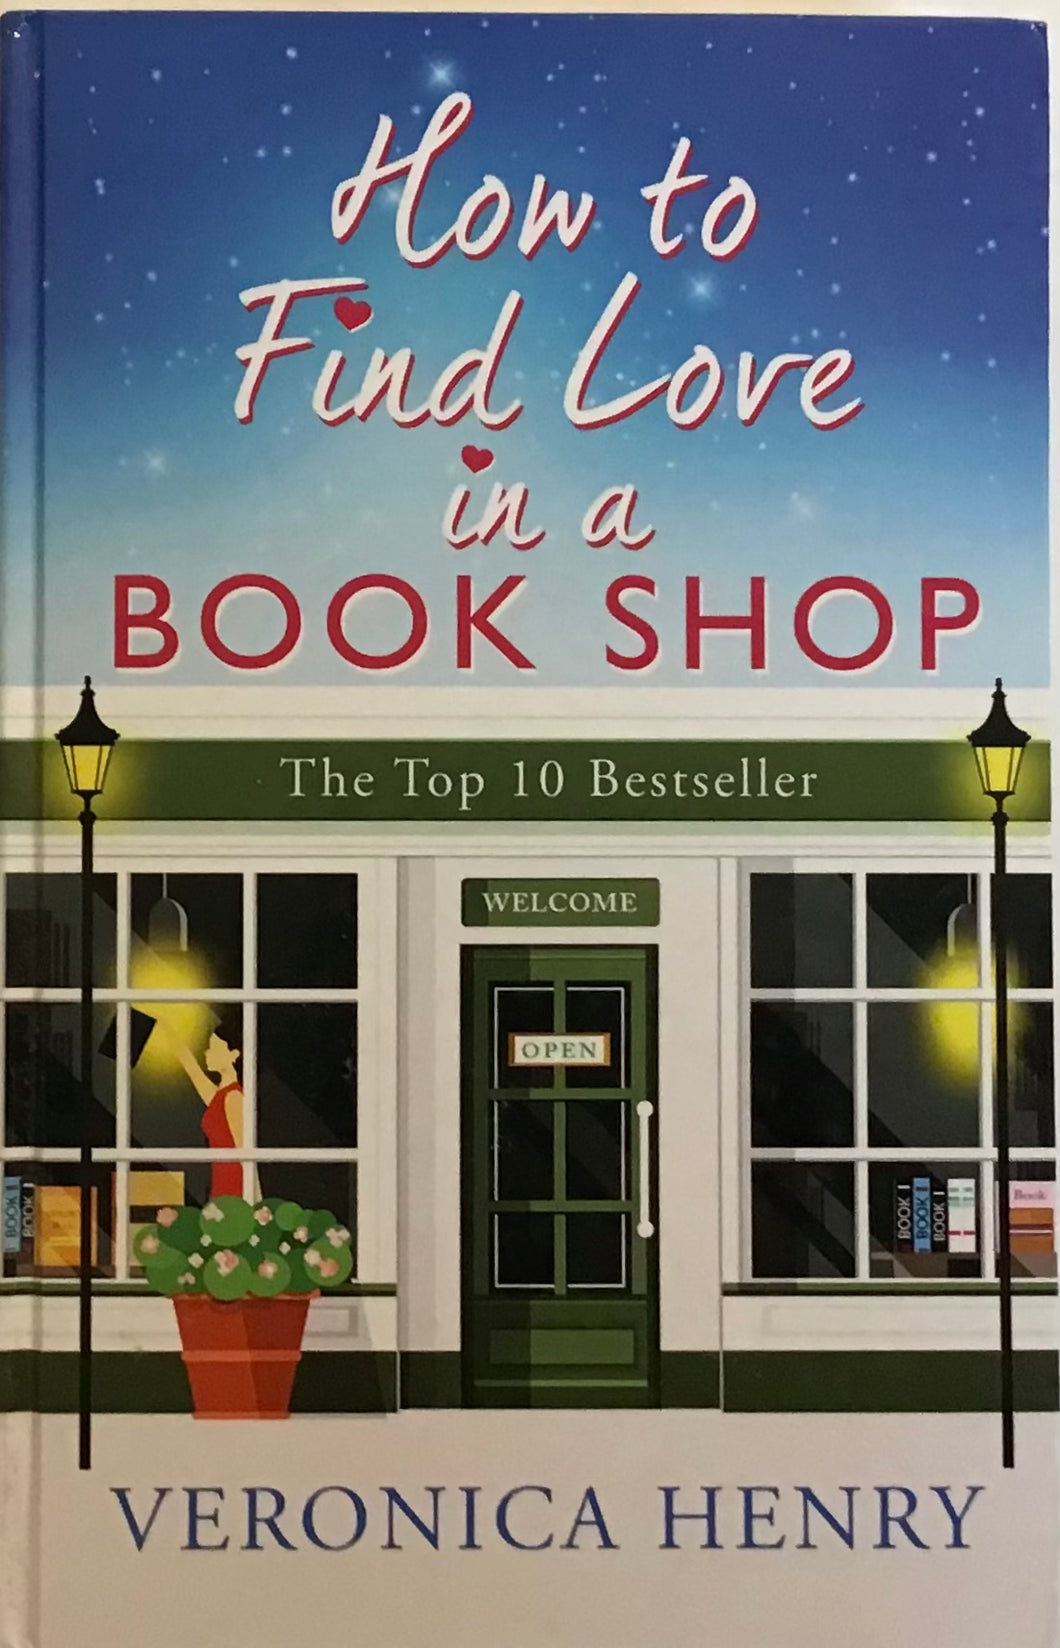 How To Find Love in a Book Shop, Veronica Henry